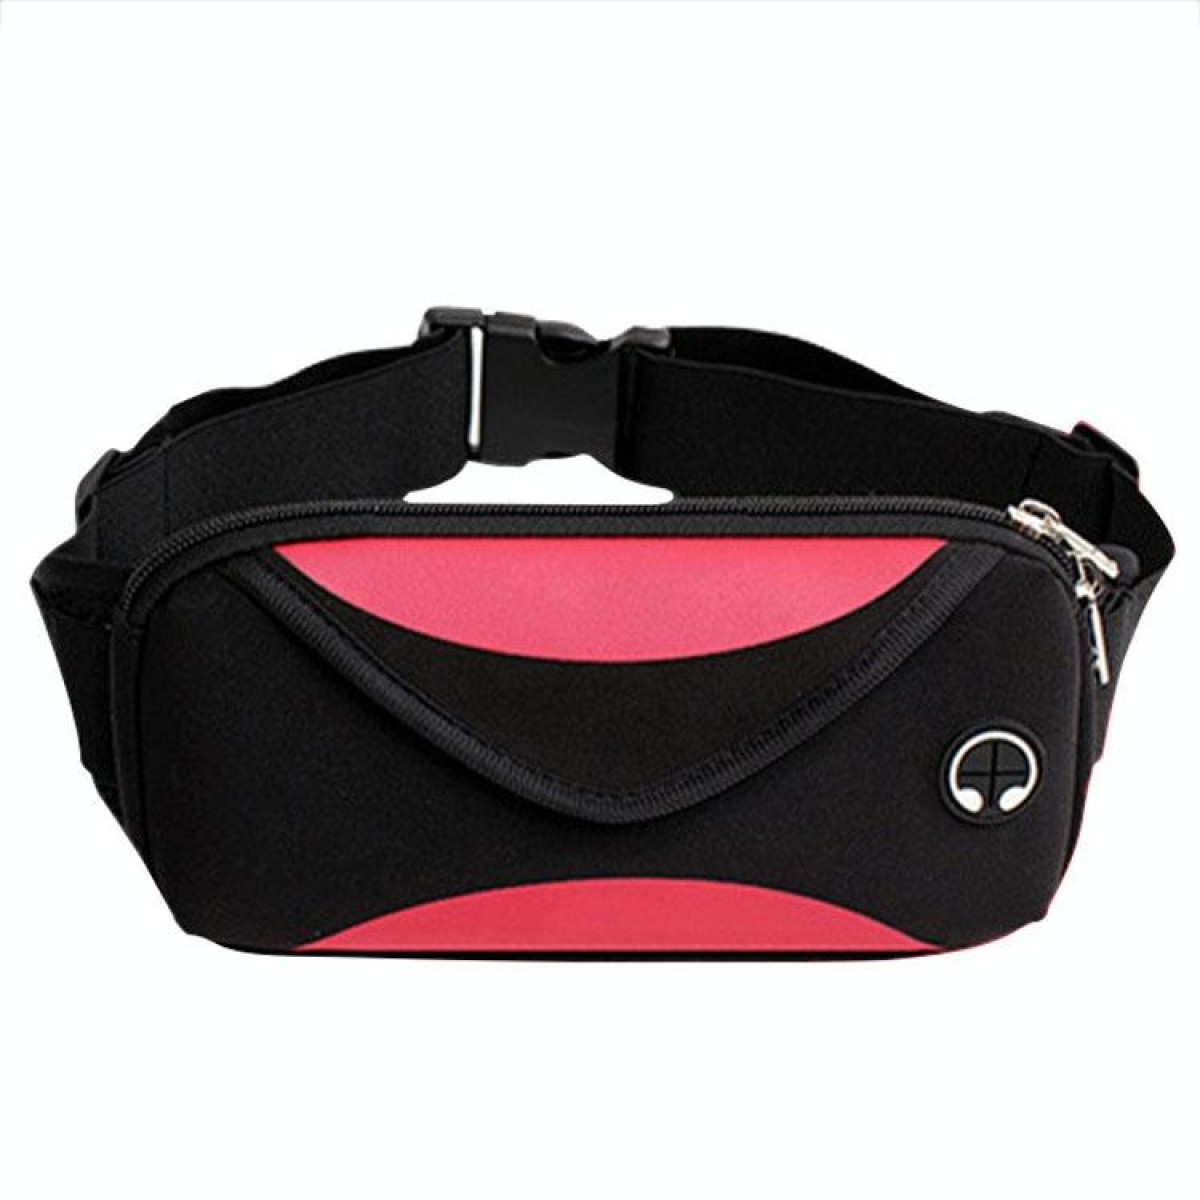 Outdoor Sports Waist Bag Anti-Lost Mobile Phone Bag Running Riding Multifunctional Water Bottle Bag(Red)